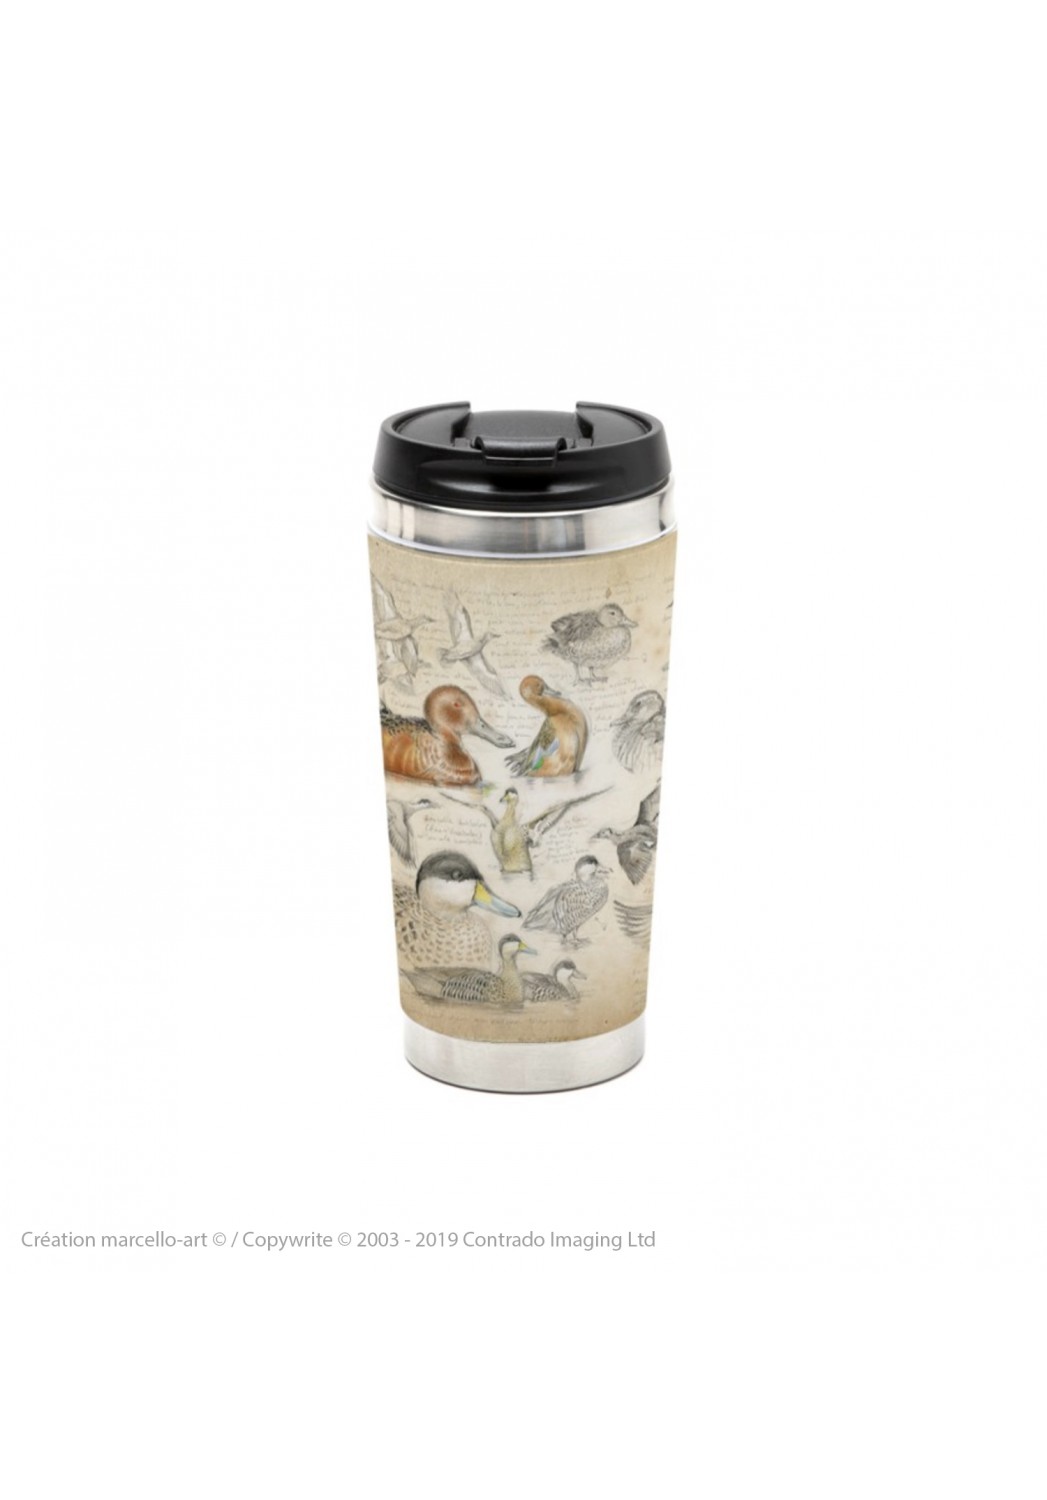 Marcello-art: Decoration accessoiries Thermos mug 239 Cinnamon teal, from Brazil, spotted and versicolor